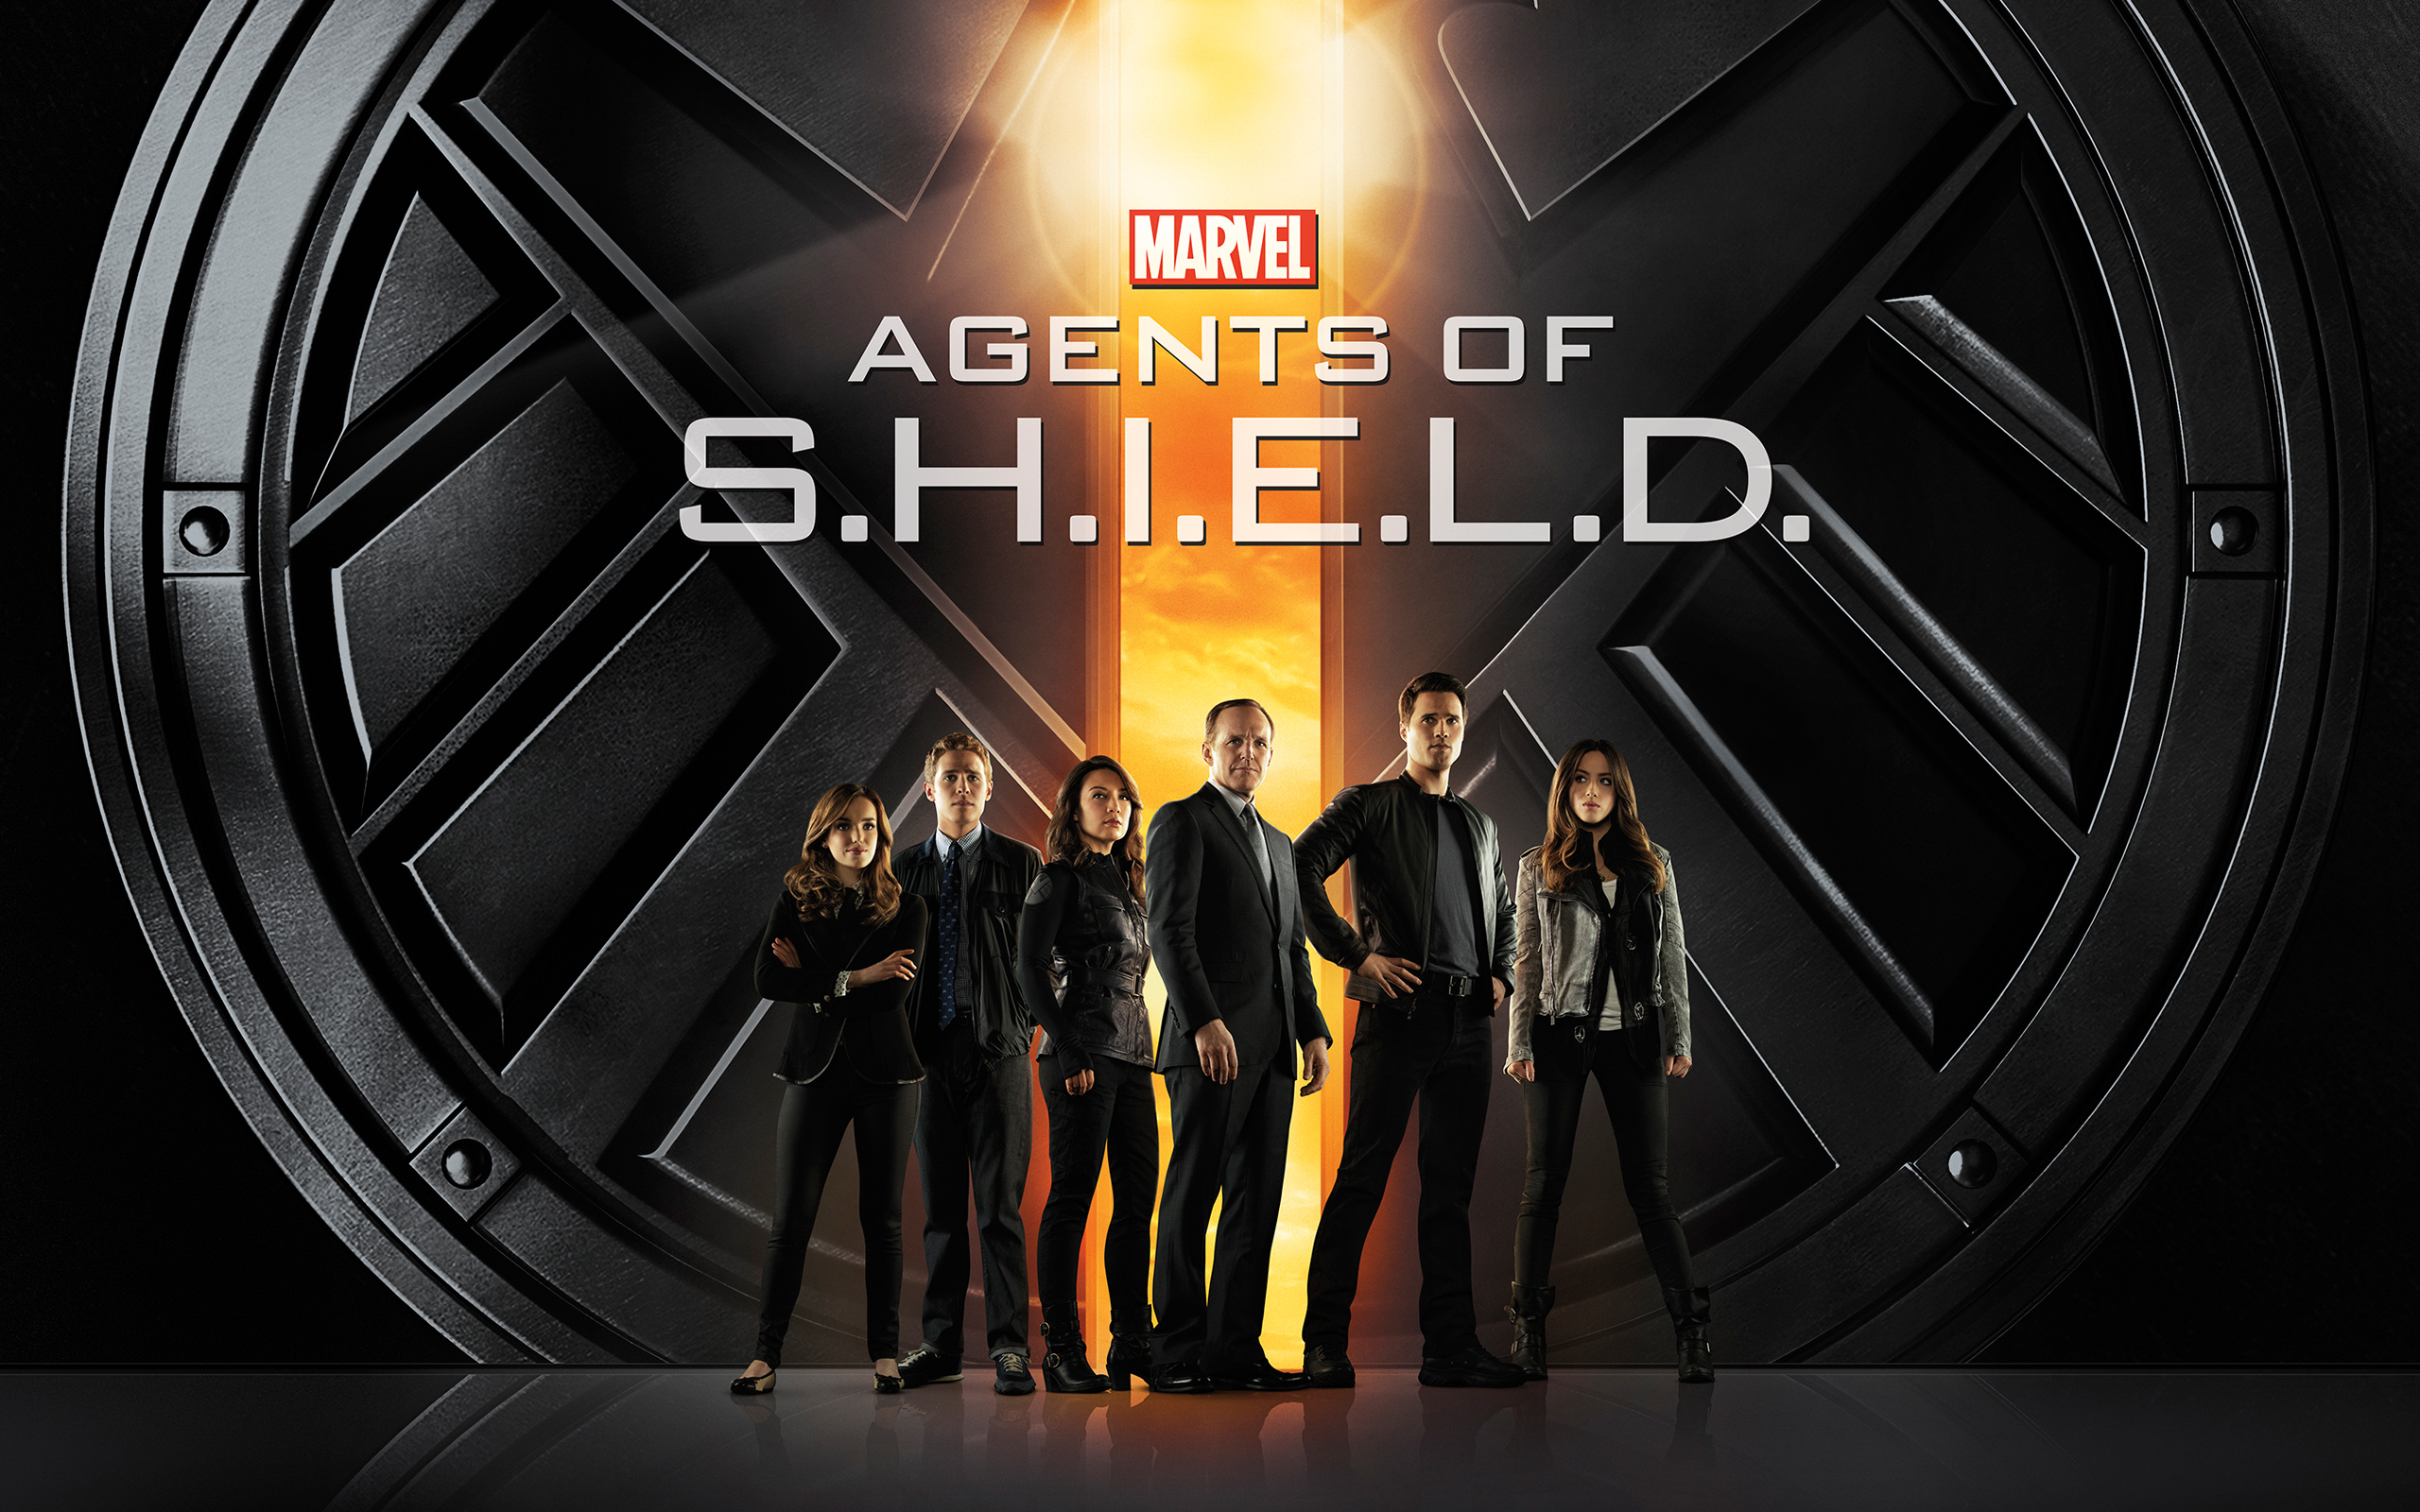 Agents of Shield promo poster, featuring Clark Gregg's Agent Coulson front and center.